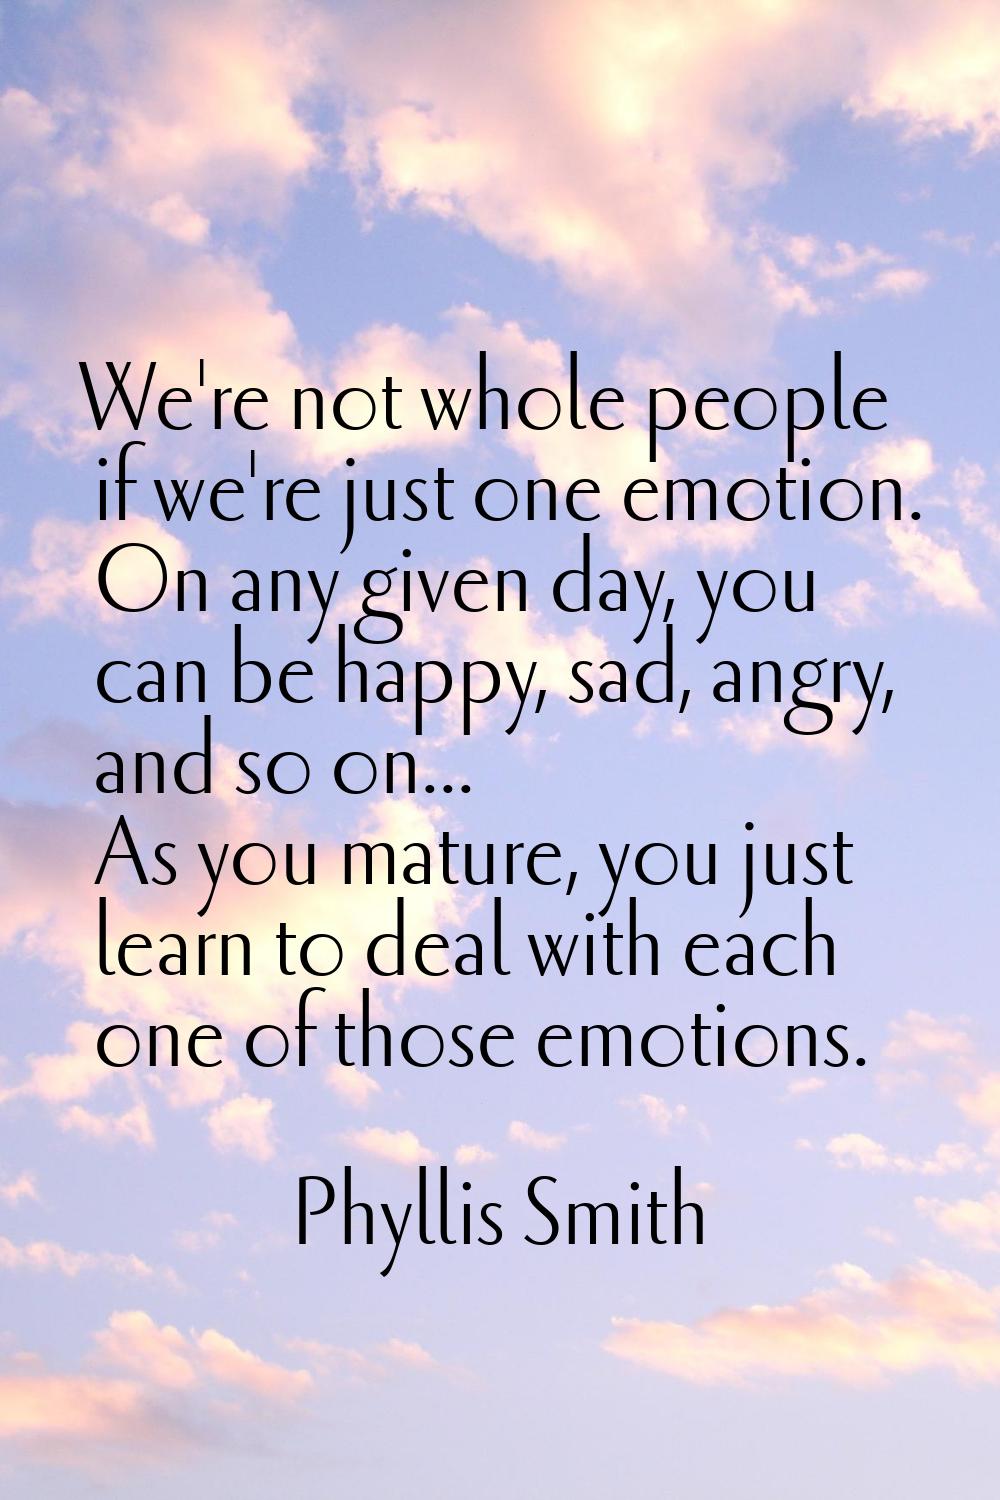 We're not whole people if we're just one emotion. On any given day, you can be happy, sad, angry, a